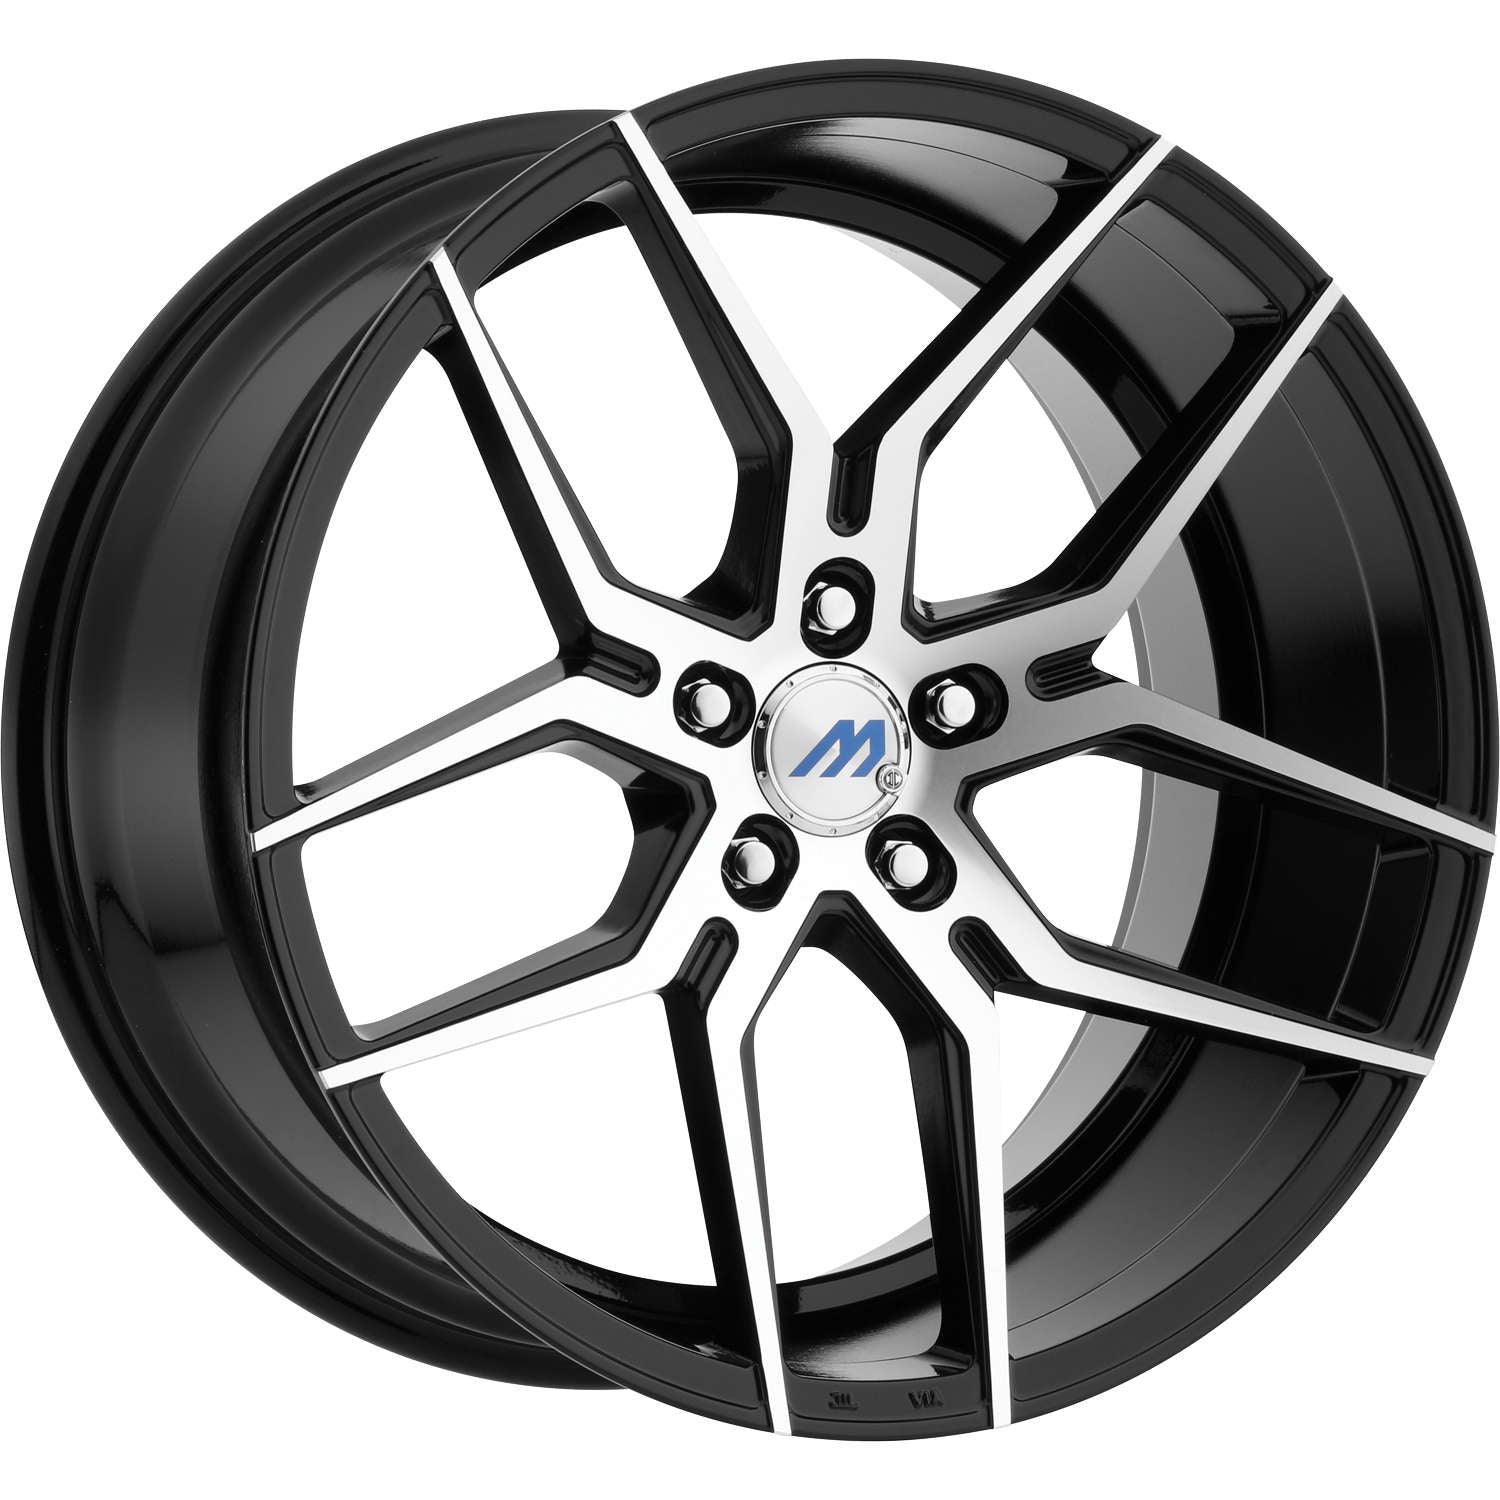 Mach ME4 Cast Alloy wheel - Gloss Black with Machined Spoke Faces ...